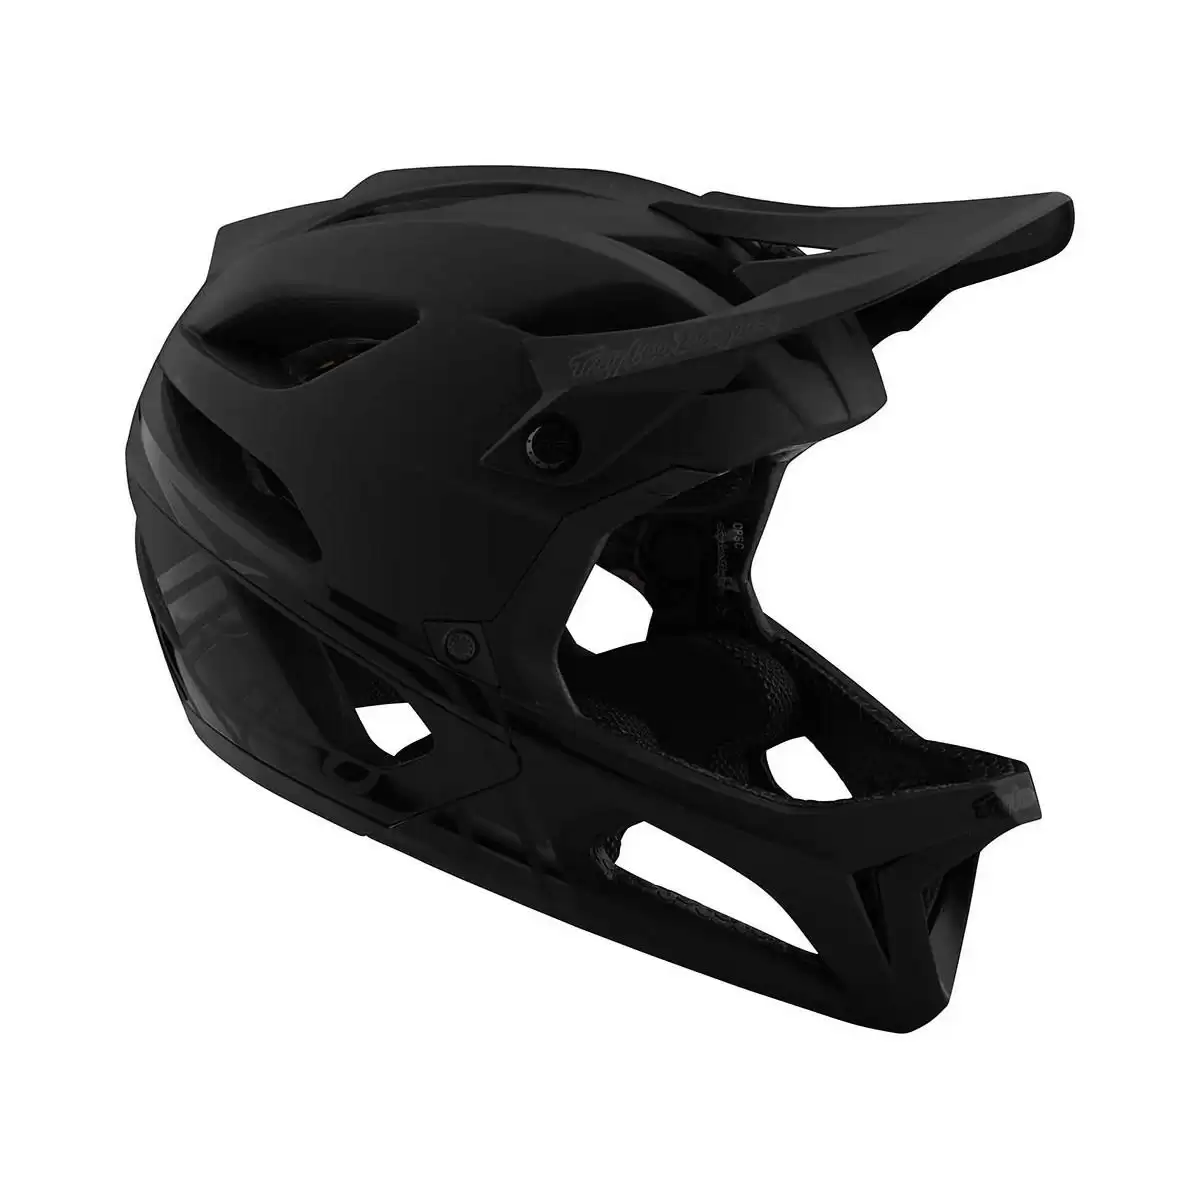 Full Face Helmet Stage MIPS Stealth Midnight Black Size XS/S (54-56cm) #1